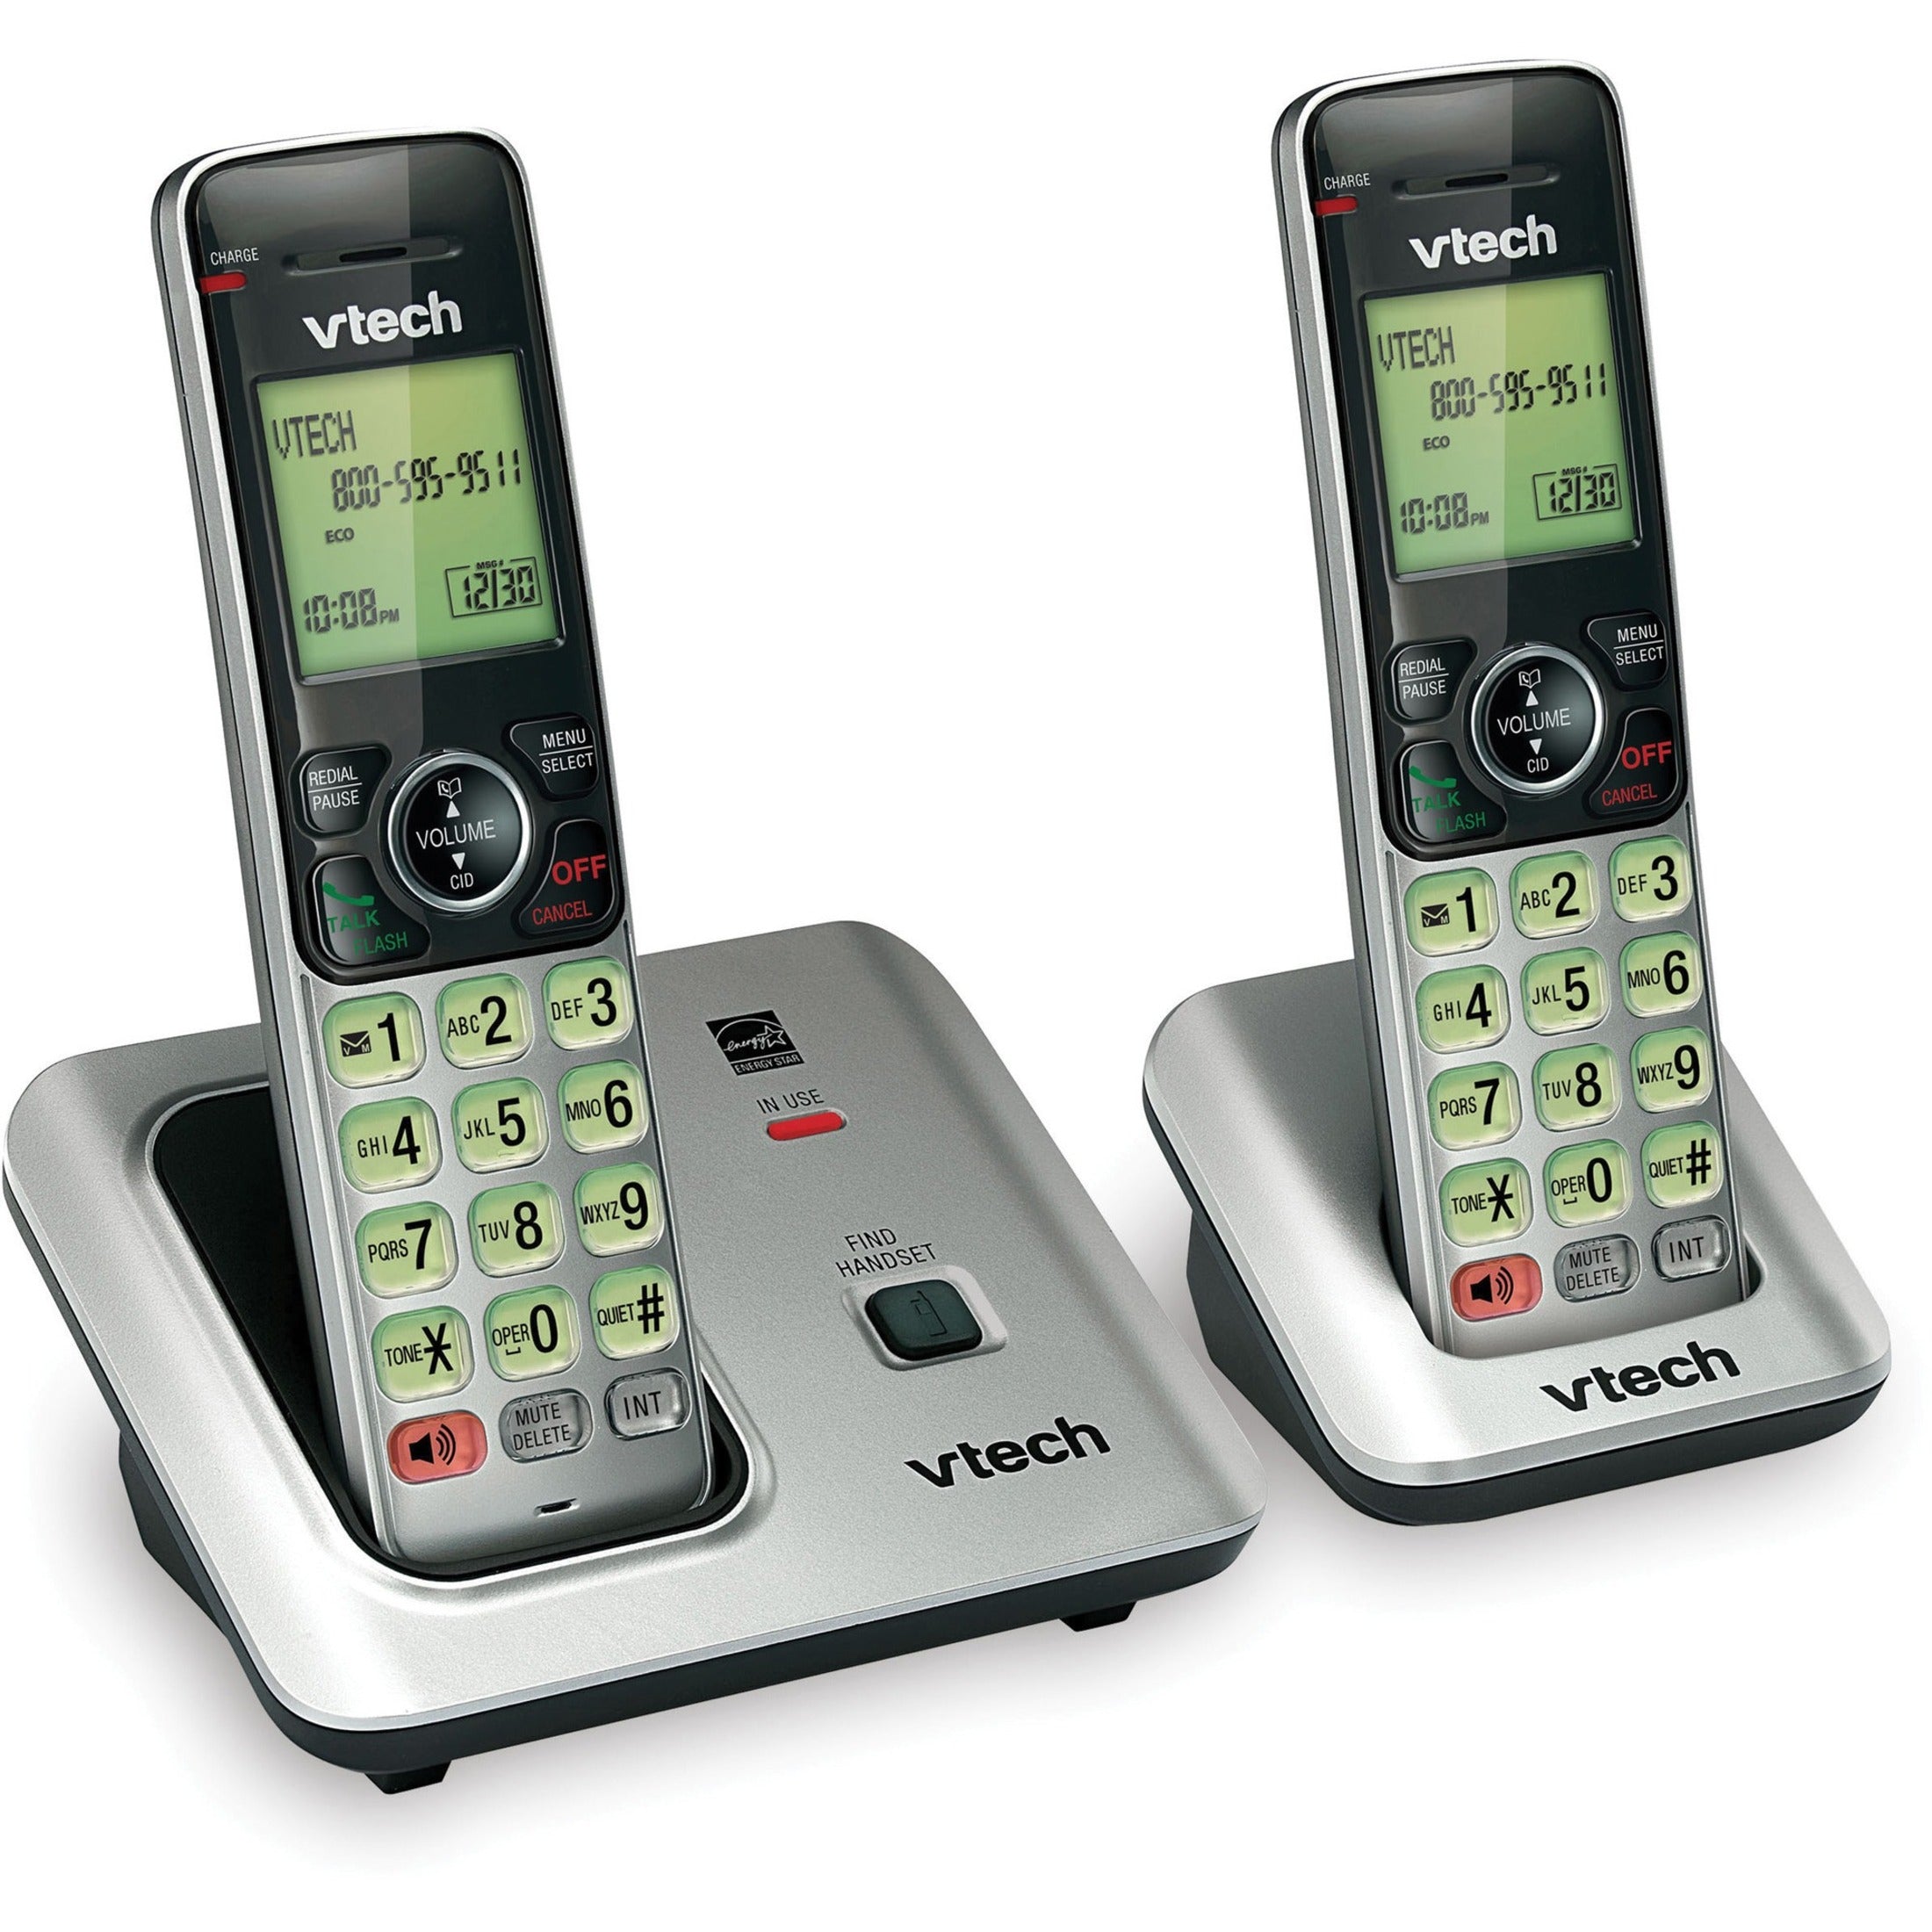 VTech 2 Handset Cordless Phone with Caller ID/Call Waiting [Discontinued]